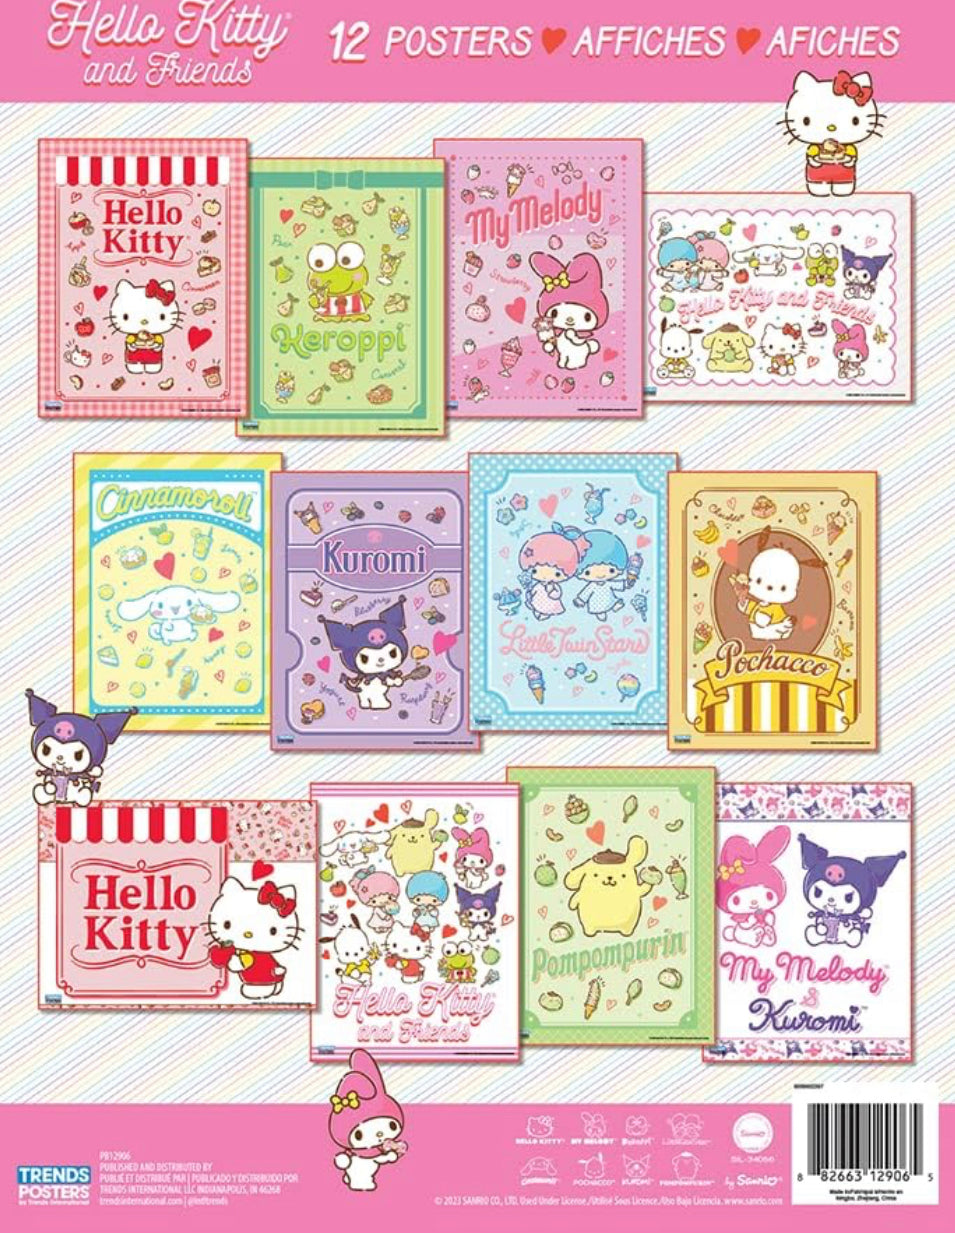 HELLO KITTY AND FRIENDS 12 posters